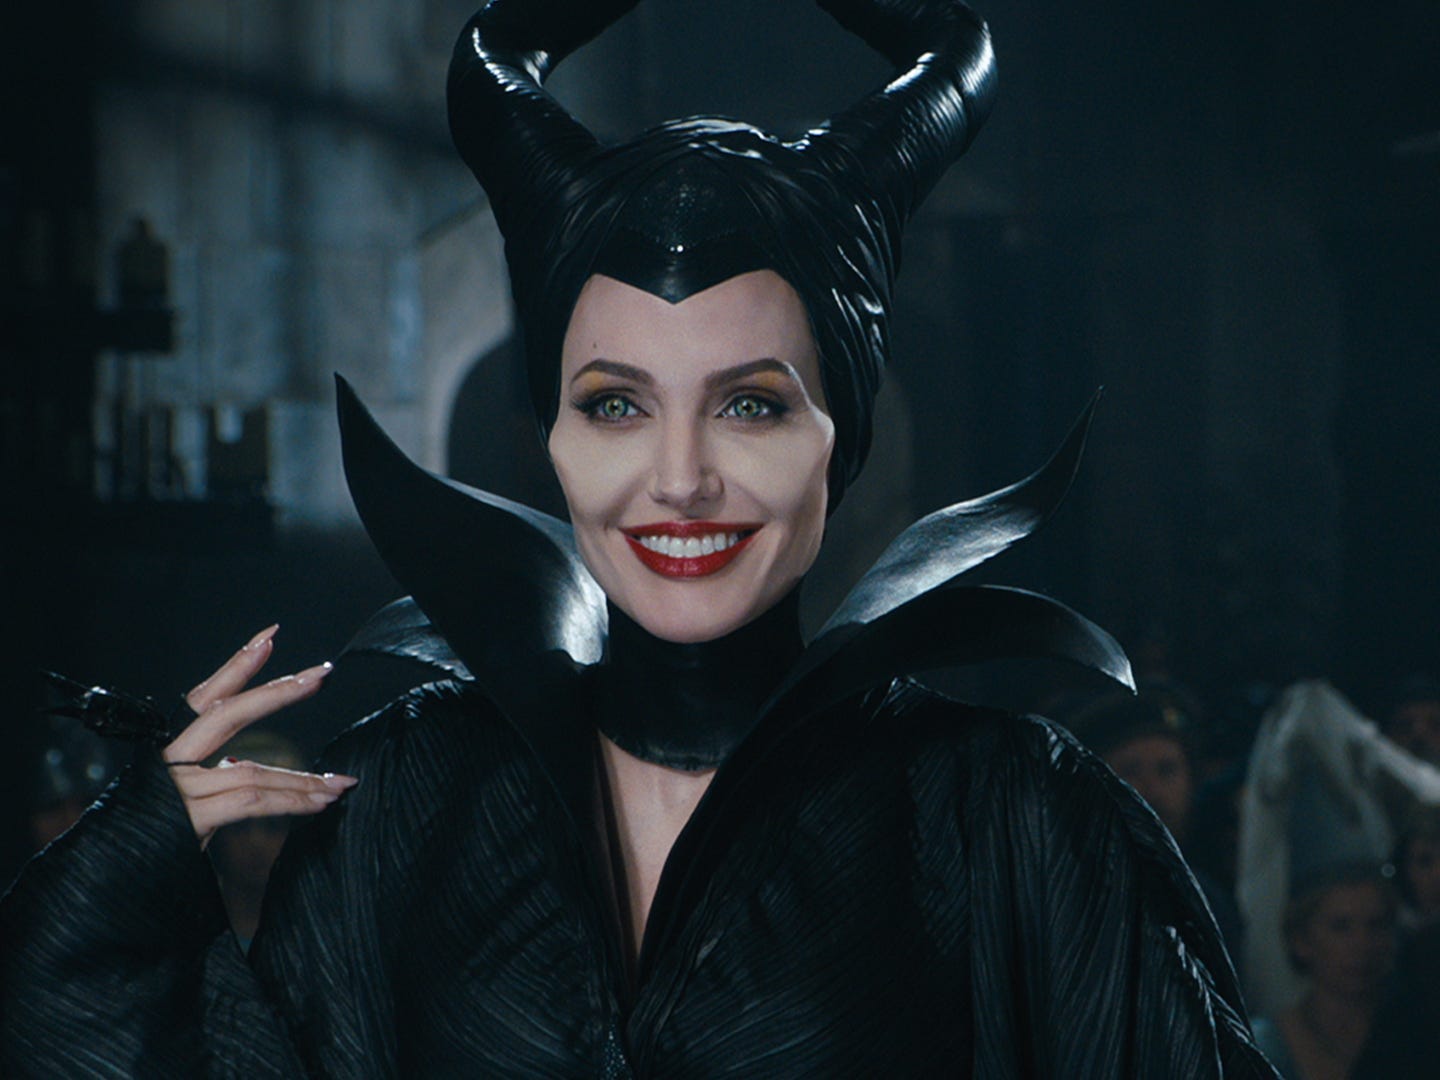 <p>Instead of making a straight-up remake of 1959's "Sleeping Beauty," Disney took a different approach with 2014's "Maleficent."</p><p>Rather than centering on Aurora, aka Sleeping Beauty, this film is the story of Maleficent, who is only seen as an evil sorceress in the original. This movie gives her a backstory and a relationship with Aurora's father, Stefan.</p><p>While this sounds good in theory, "Maleficent" is perfectly average. <a href="https://www.businessinsider.com/maleficent-reviews-2014-5">Angelina Jolie</a> gives it her all as Maleficent, but the special effects are dated, and the story isn't memorable.</p><p>It took five years for a sequel to come out ("<a href="https://www.businessinsider.com/maleficent-sequel-opens-weak-at-the-box-office-2019-10">Maleficent: Mistress of Evil</a>"), and by then, the momentum from the financial success of "Maleficent" had apparently slowed.</p>